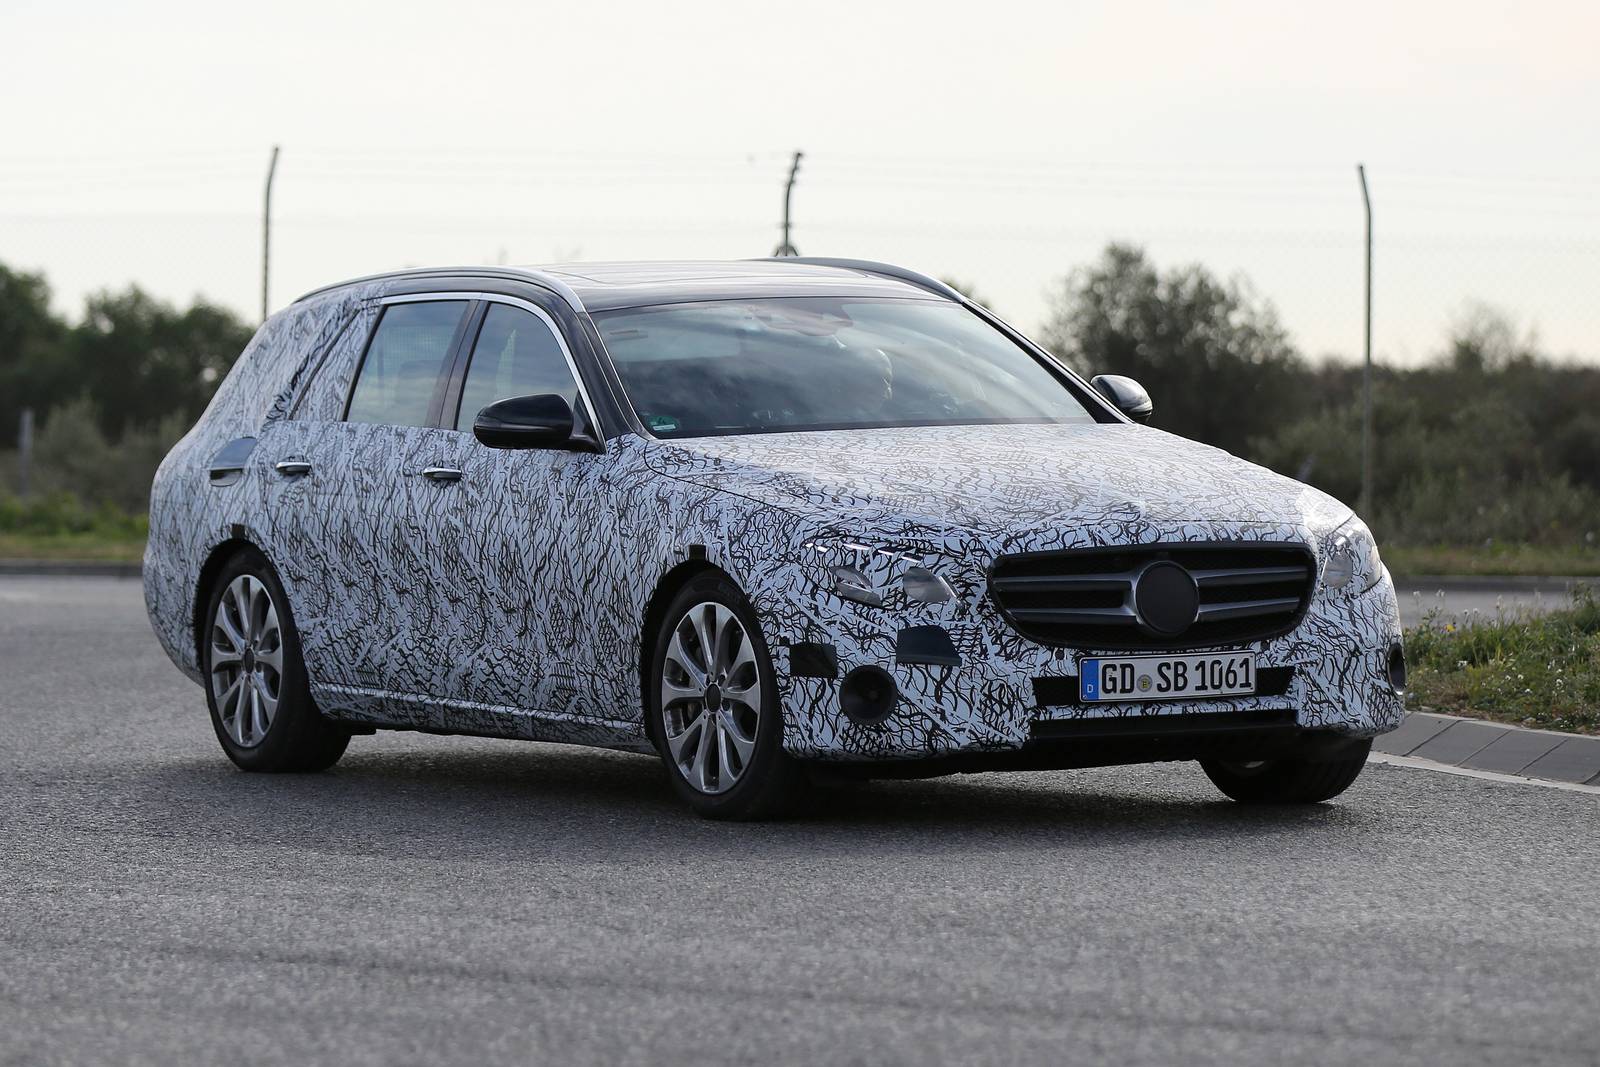 Spy Images From The E-Class Coupe And E-Class Estate By Mercedes-Benz 2